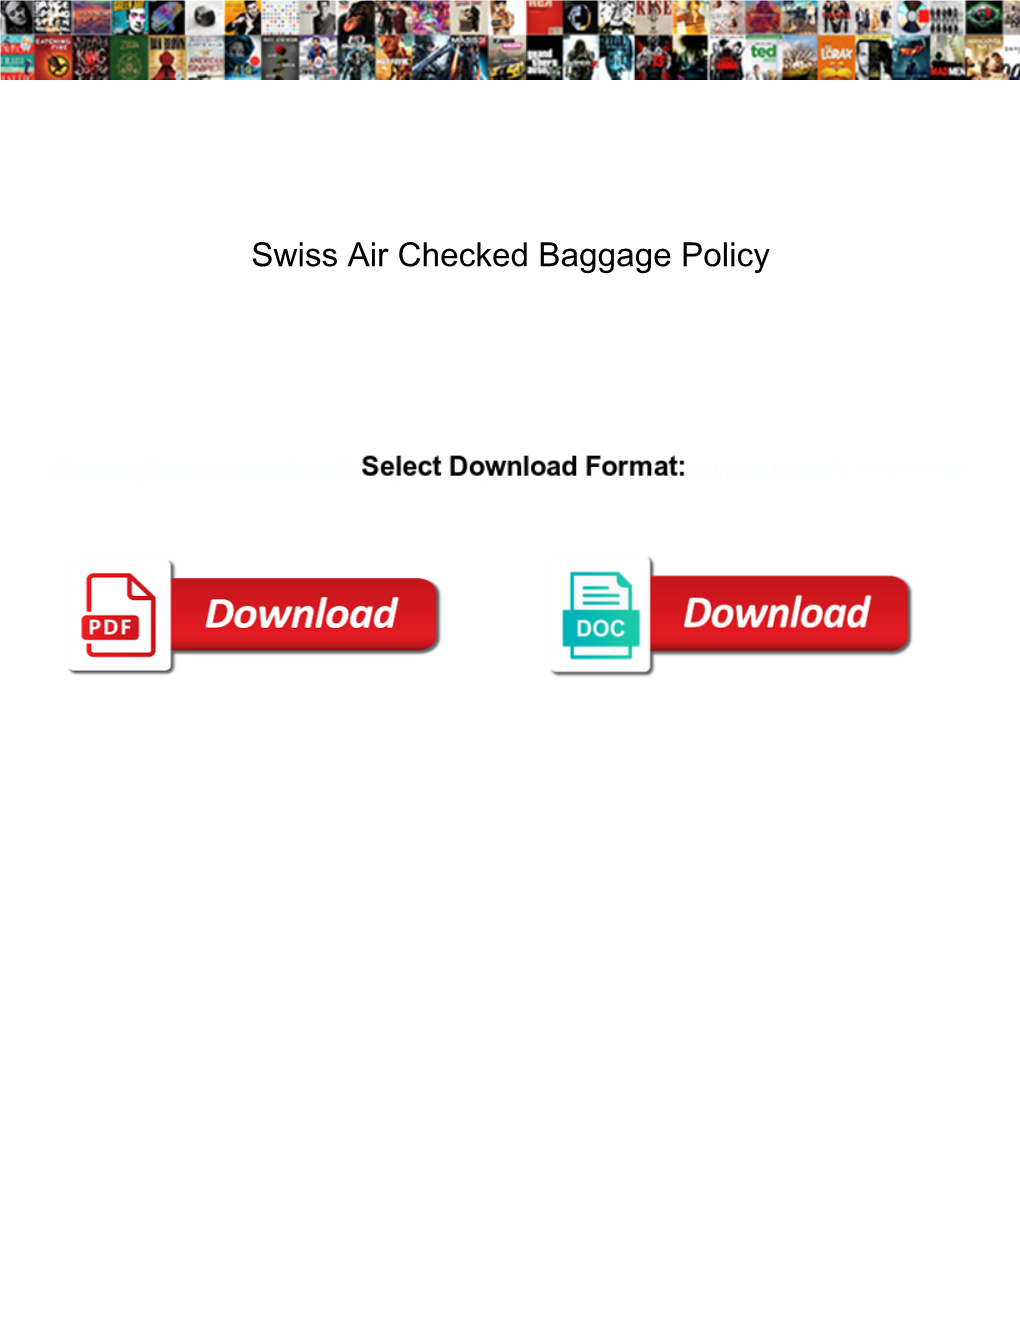 Swiss Air Checked Baggage Policy